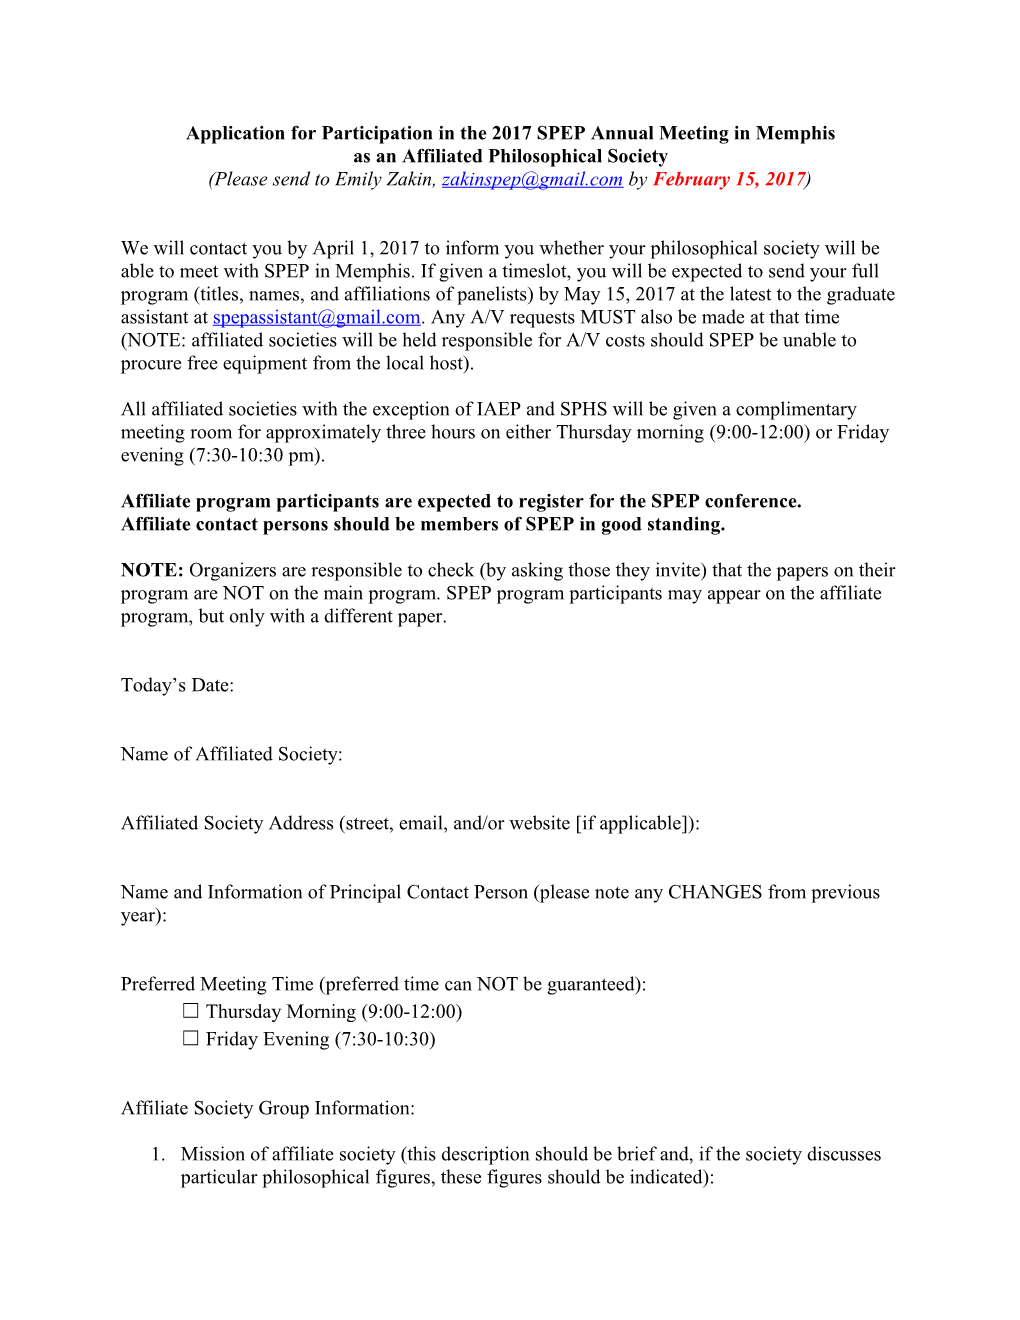 Application for Participation in the SPEP Annual Meeting As a Satellite Group